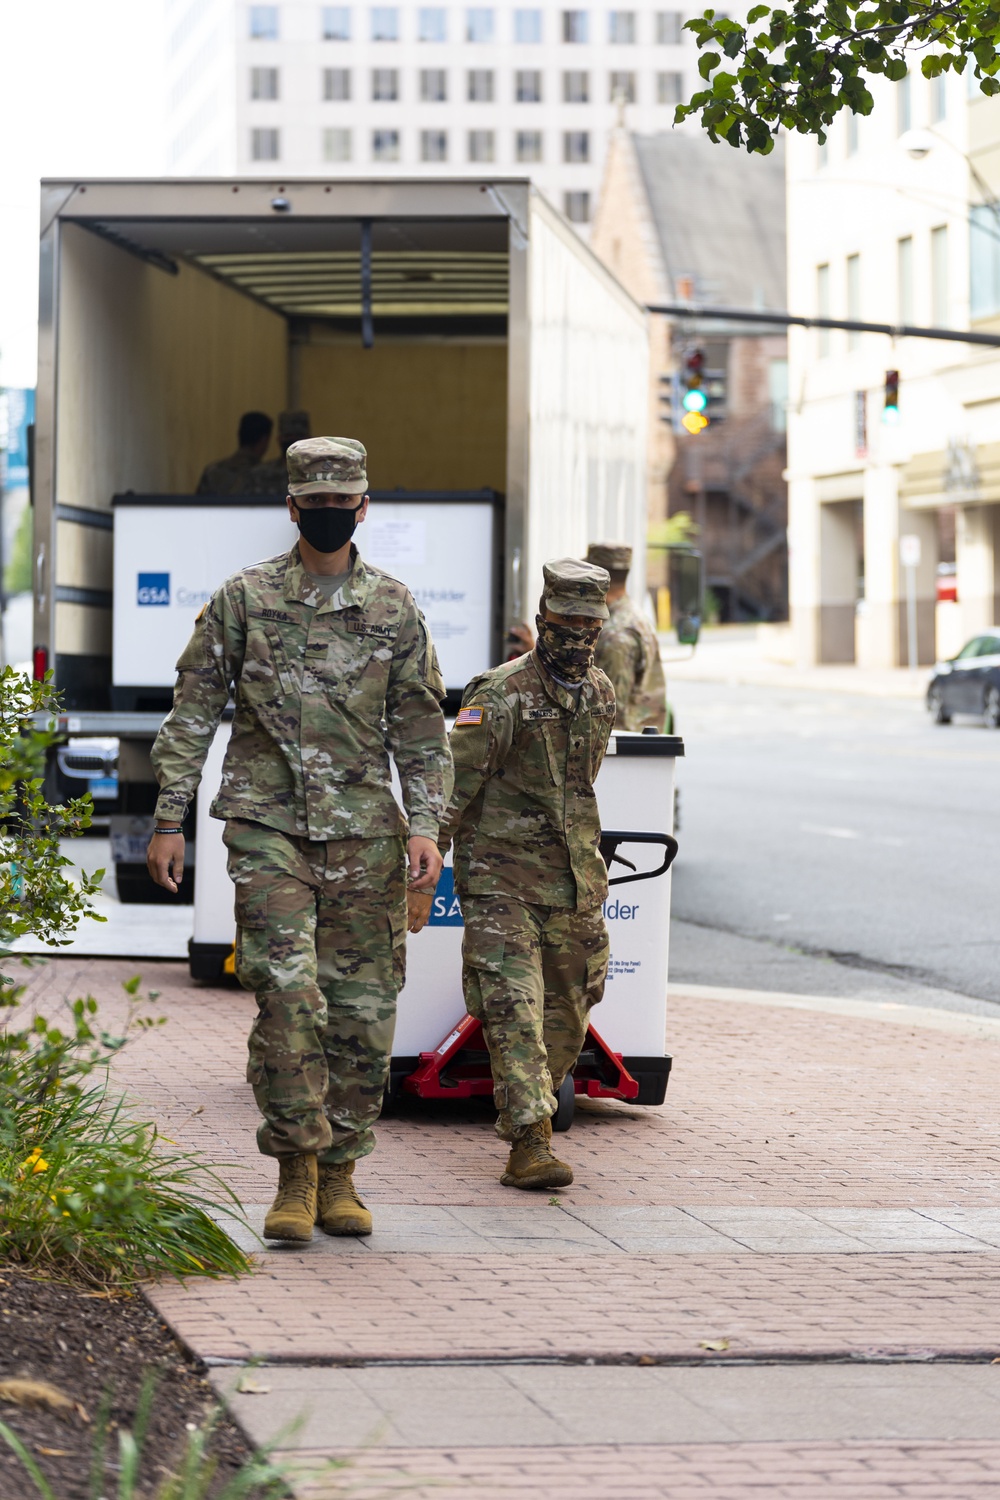 Connecticut National Guard continues Covid-19 support efforts